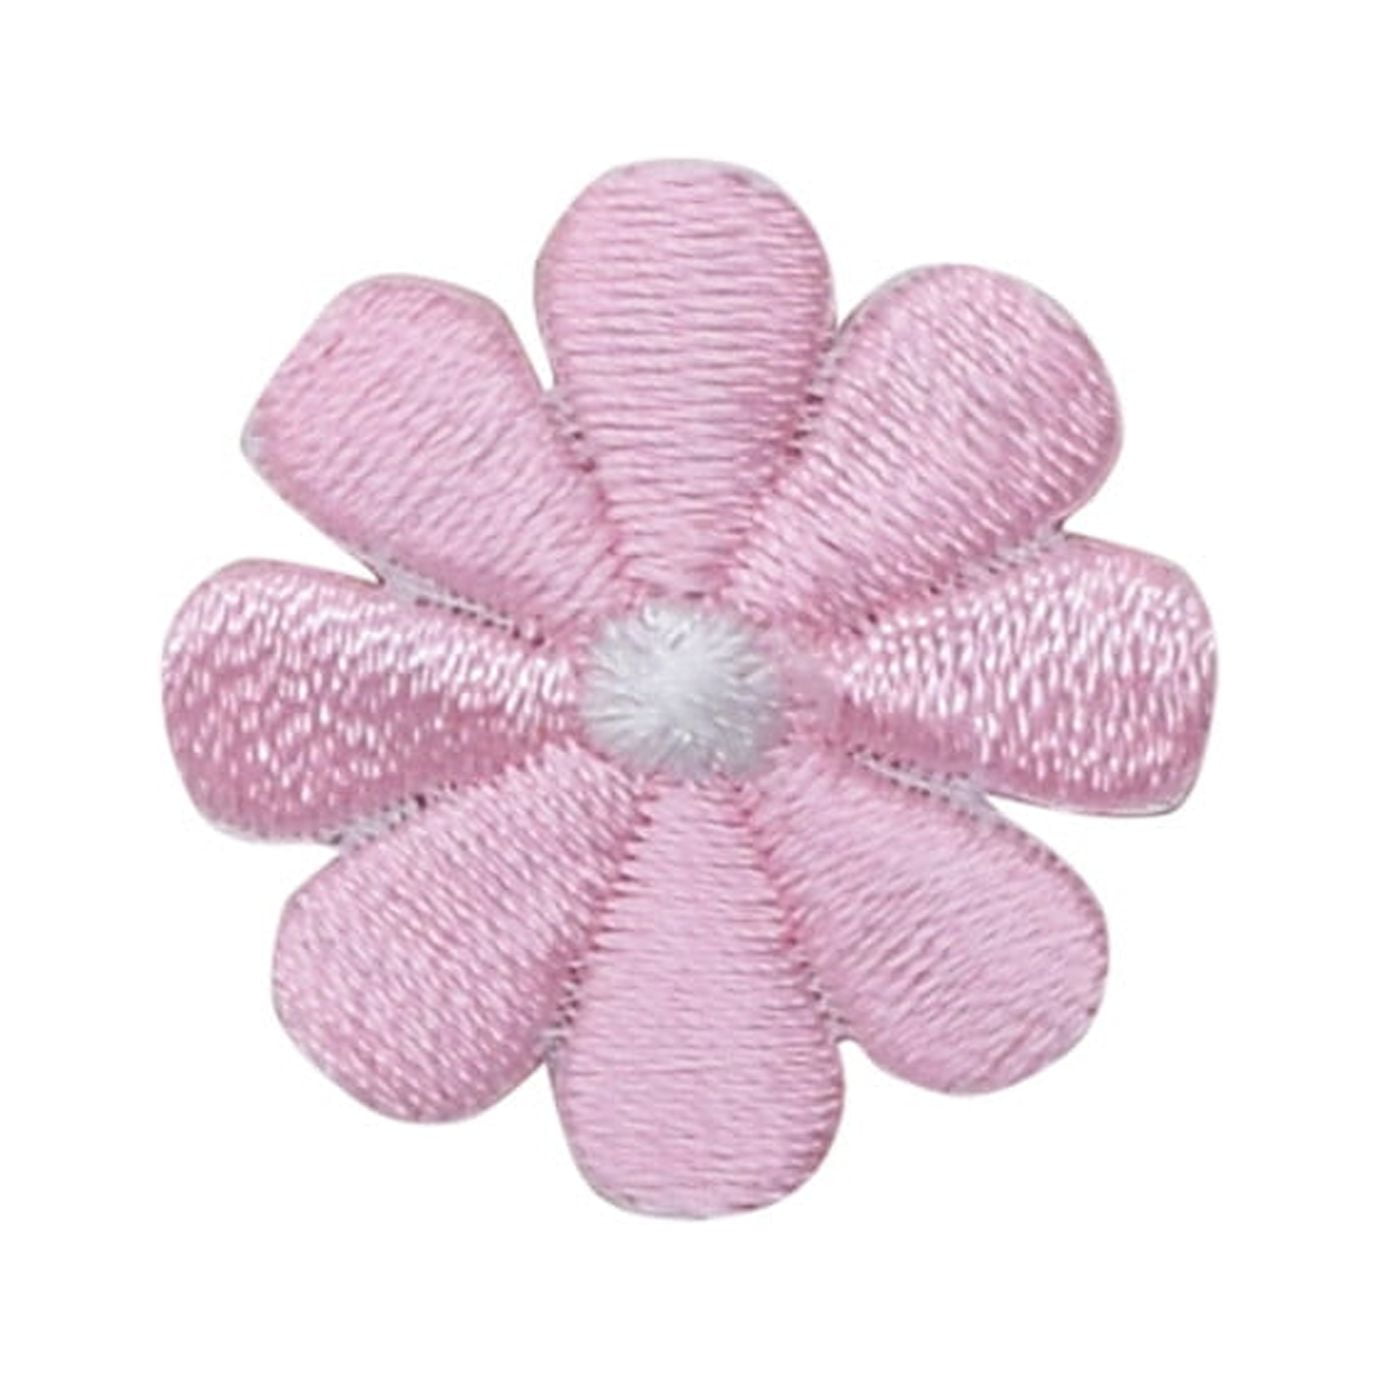 Small - Light Pink Daisy - Flower - Iron on Applique/Embroidered Patch 